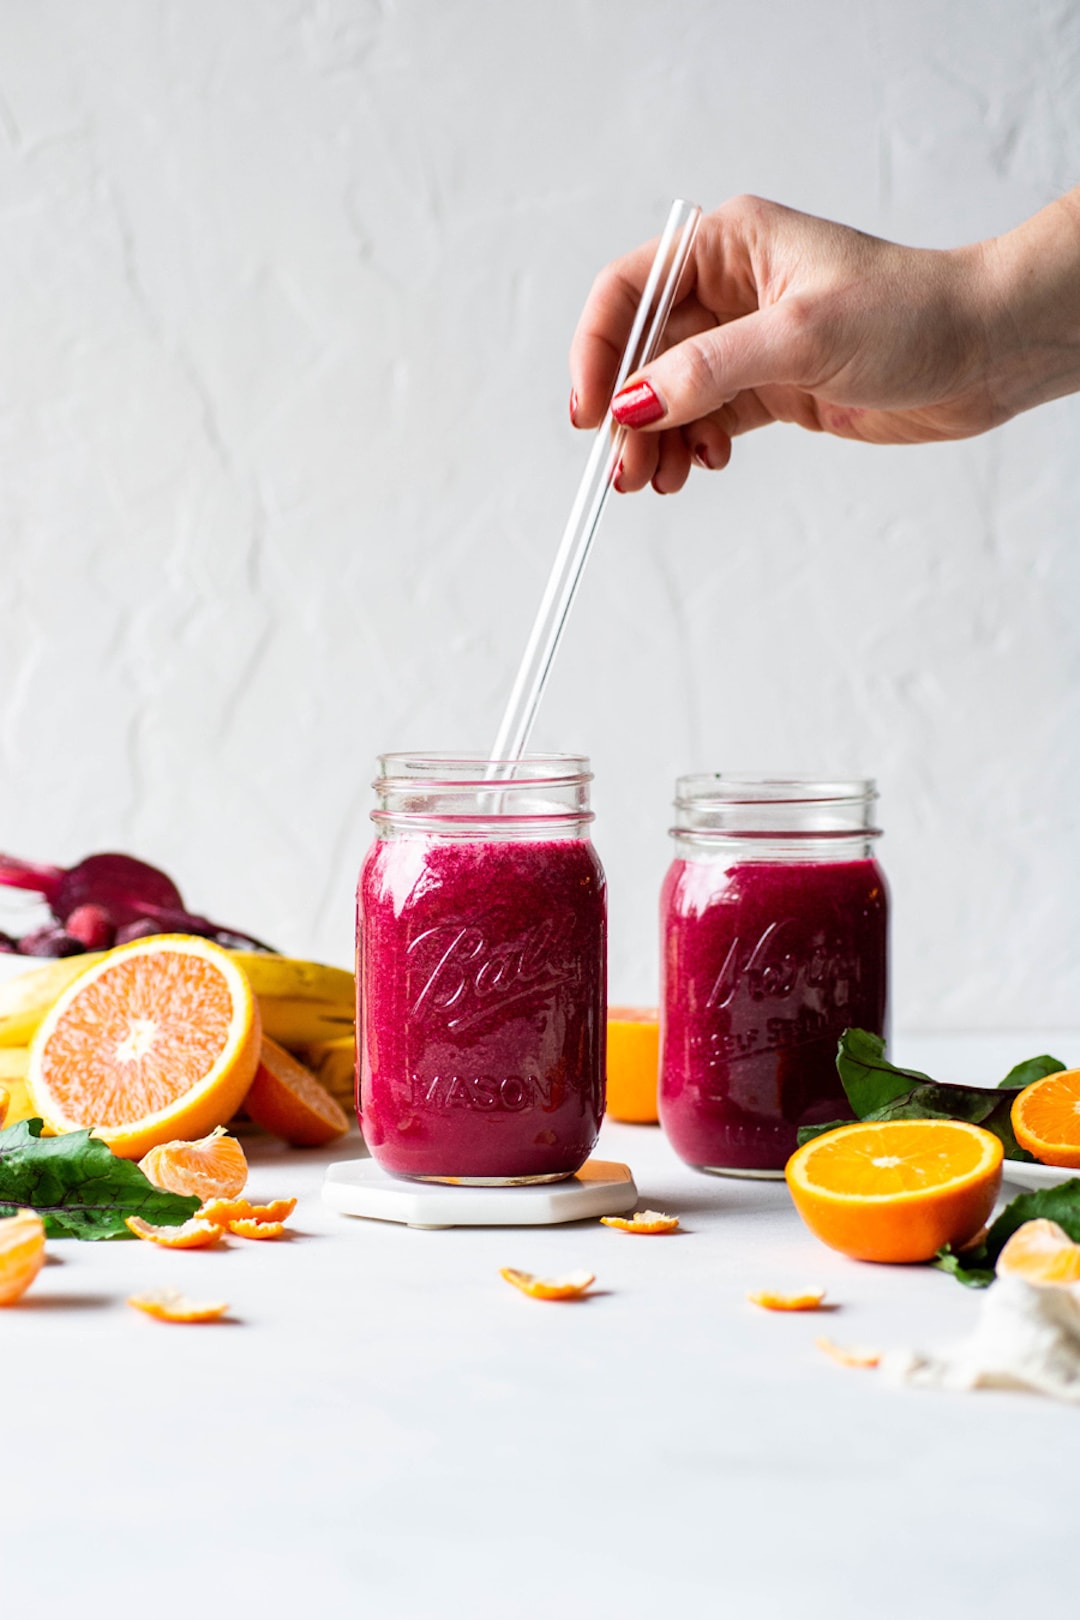 beet and berry smoothies in two glass jars with oranges on the side